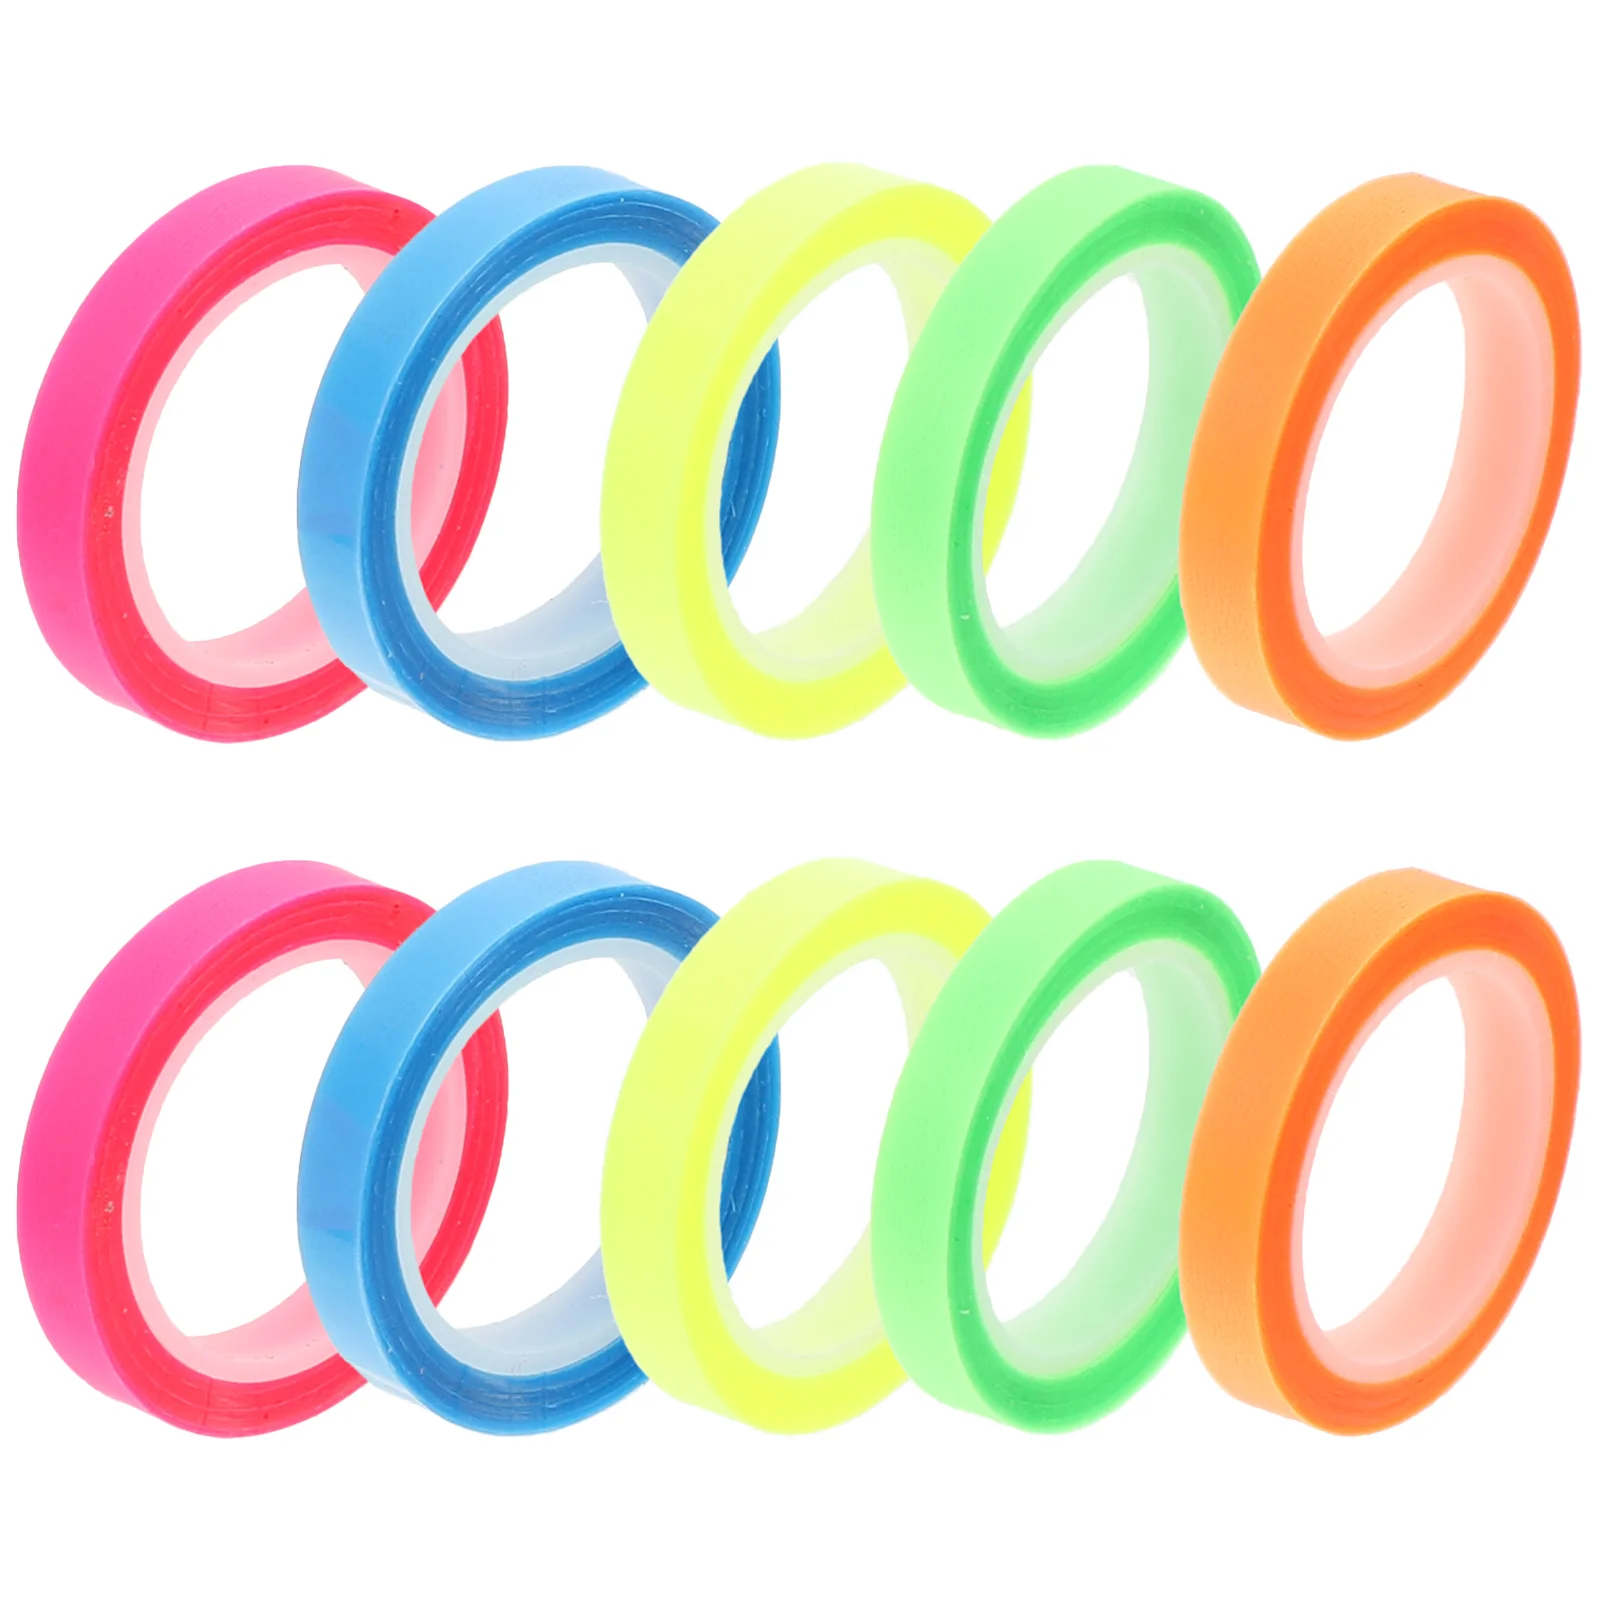 

Transparent Highlighter Tape Professional Adhesive Reading Tapes Reading Marking Sticker Fluorescent Colored Tag